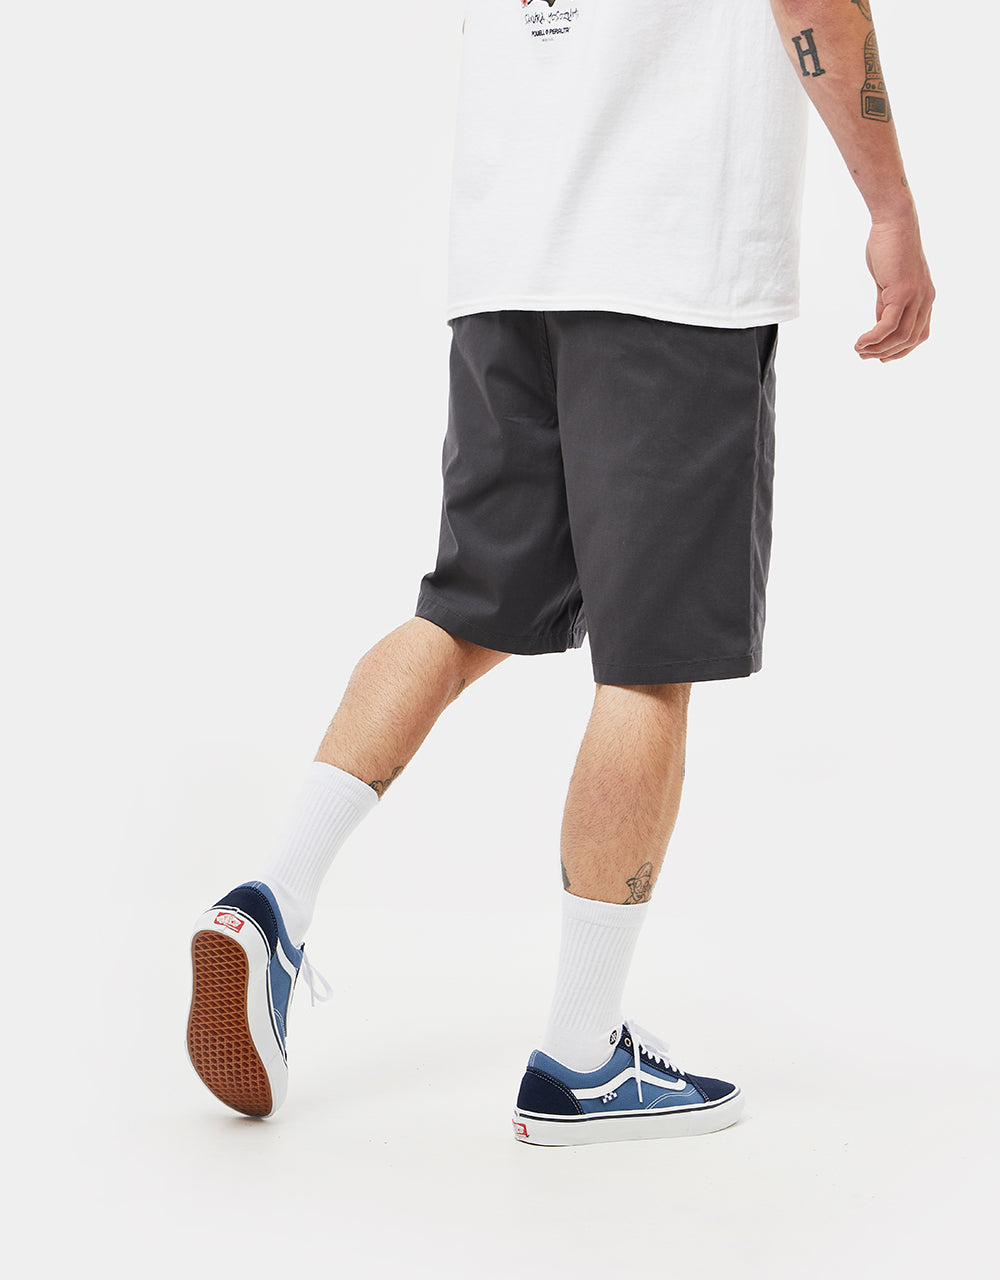 Vans Authentic Relaxed Chino Short - Asphalt